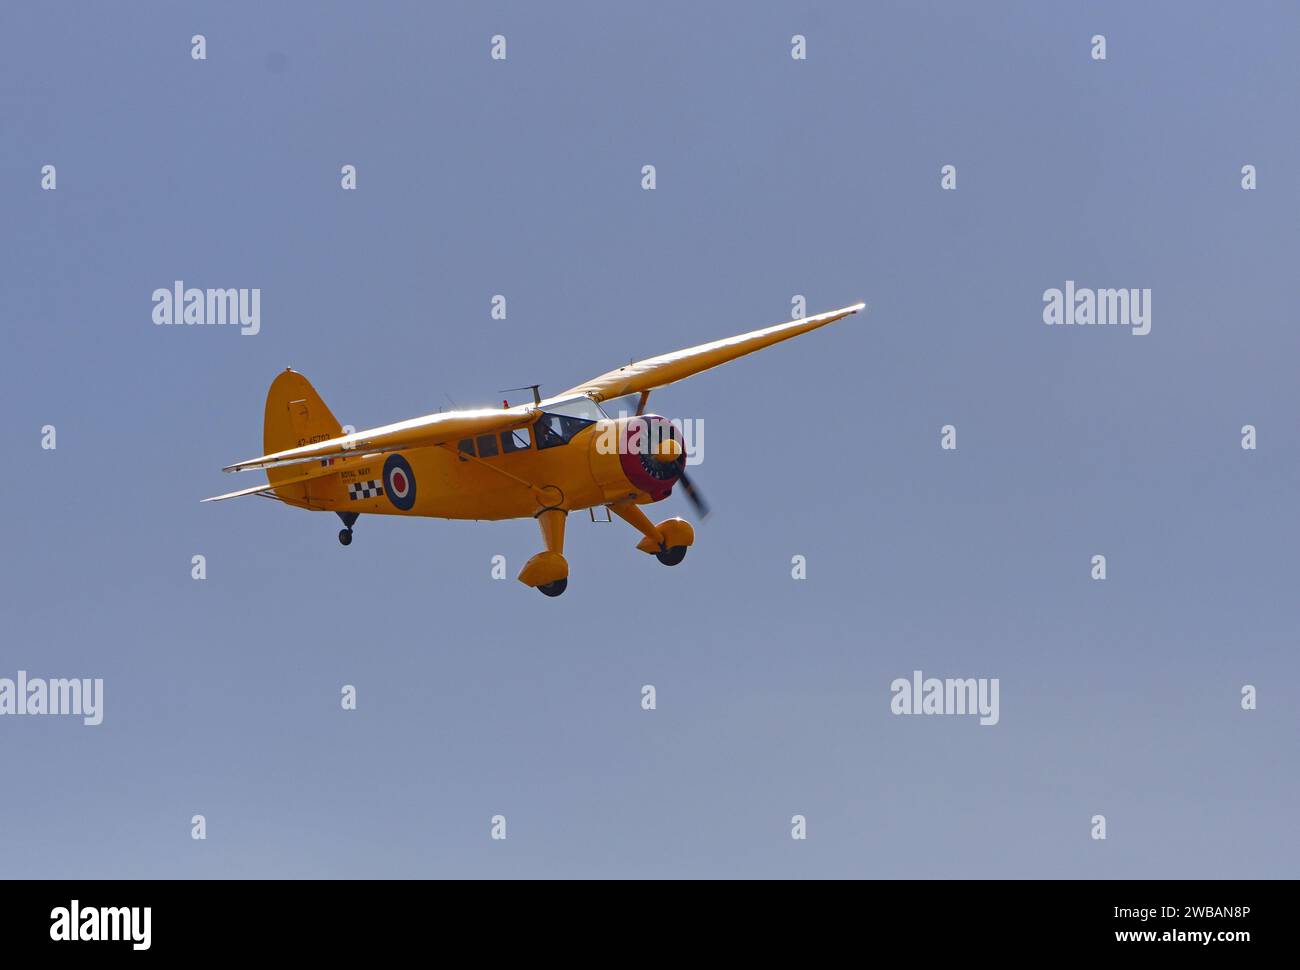 Stinson Reliant  aircraft  1942 in  royal navy yellow colours flying . Stock Photo